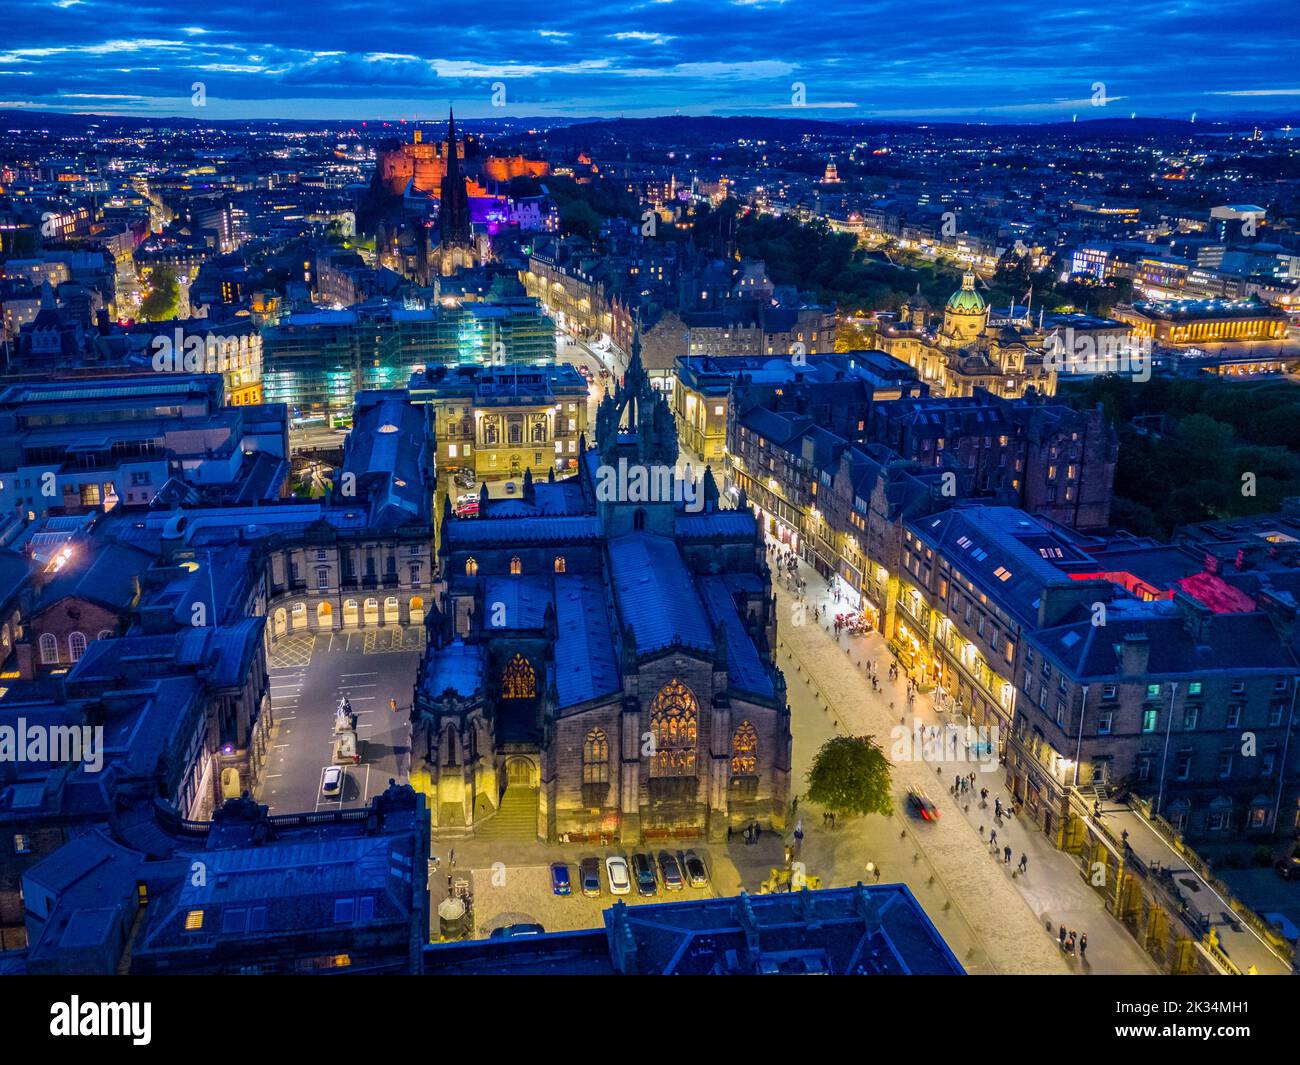 Edinburgh, Scotland, UK. 24th September 2022. Aerial view at night of the Royal Mile two weeks after Queen Elizabeth II lay inside St Giles Cathedral and thousands of people lined the street. The Royal Mile is now back to normal and still busy with the usual heavy influx of tourists.  Iain Masterton/Alamy Live News Stock Photo